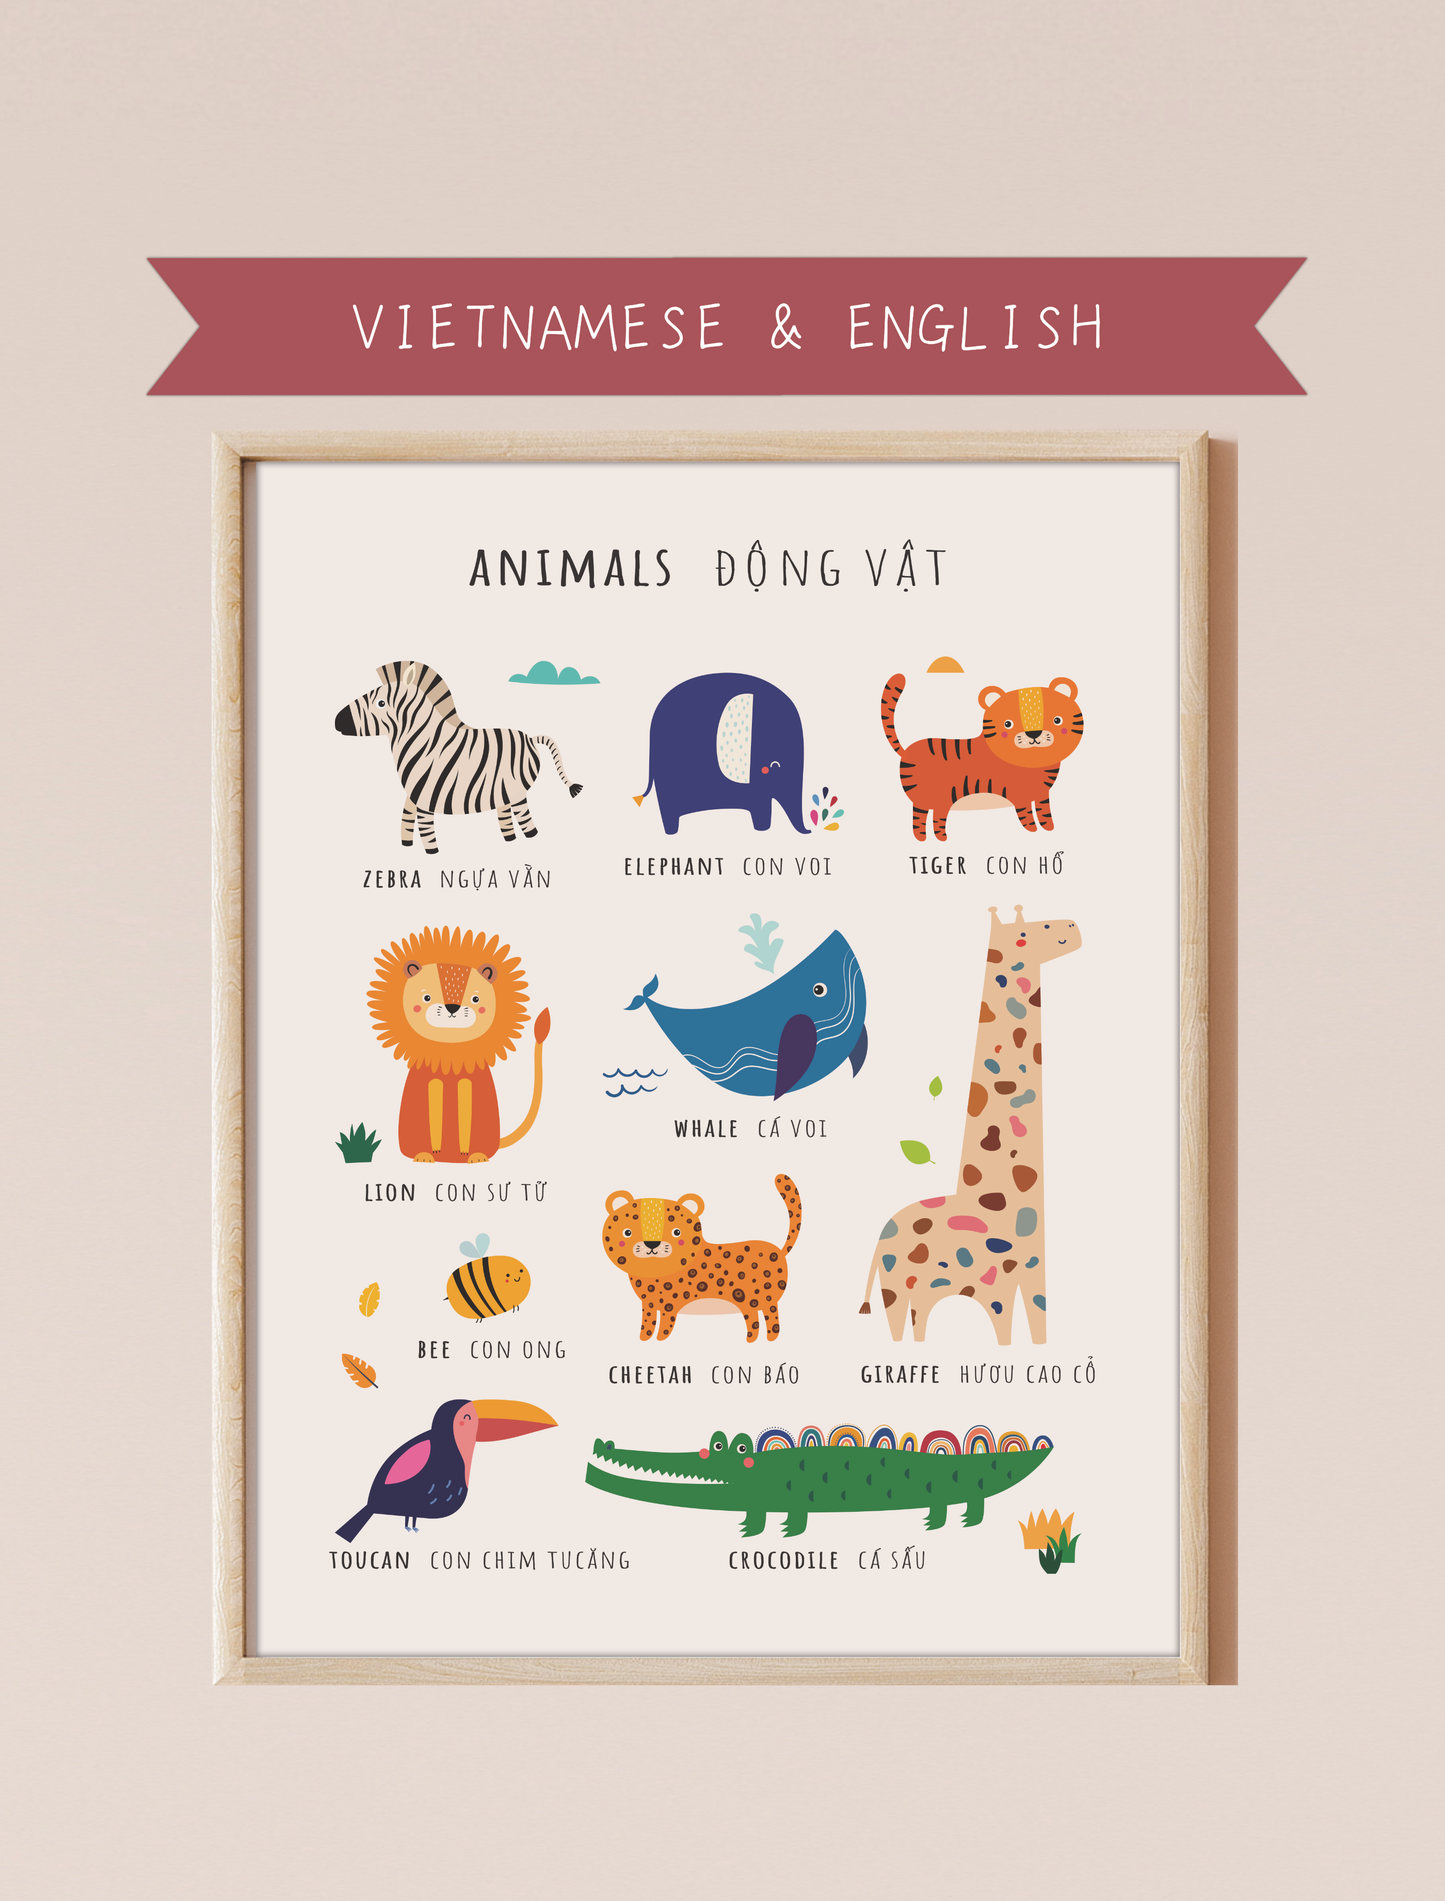 A bilingual educational print featuring animals labeled in English and Vietnamese. The print displays cute, colorful illustrations of the following animals: zebra, elephant, tiger, lion, whale, bee, cheetah, giraffe toucan, and crocodile . This bilingual display aids in language acquisition and cross-cultural learning.